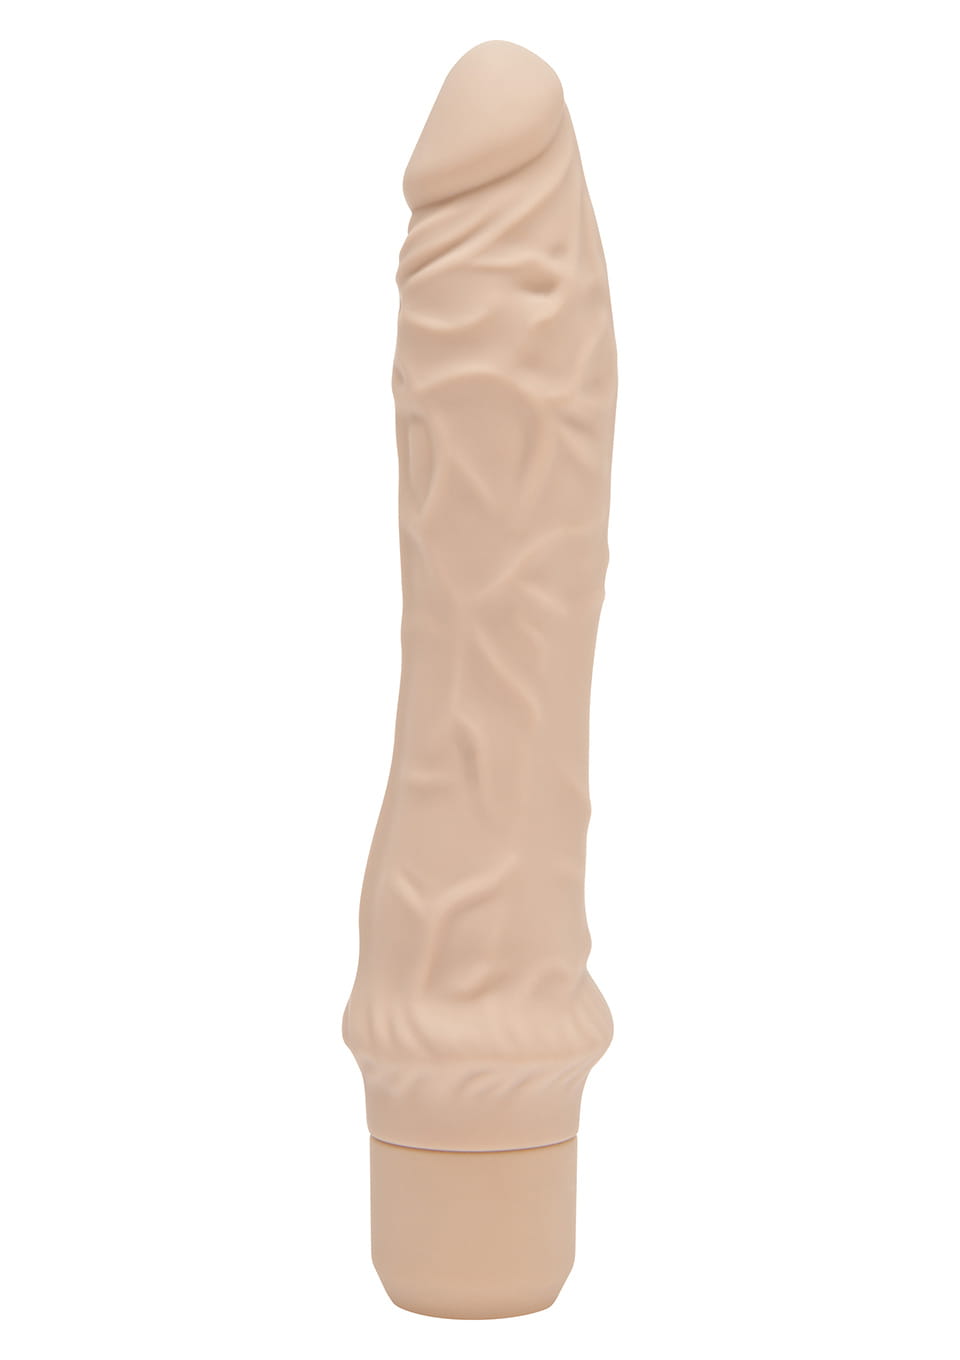 Gode Vibrant Silicone Classic Large Sextoys Sextoy réaliste Oh! Darling